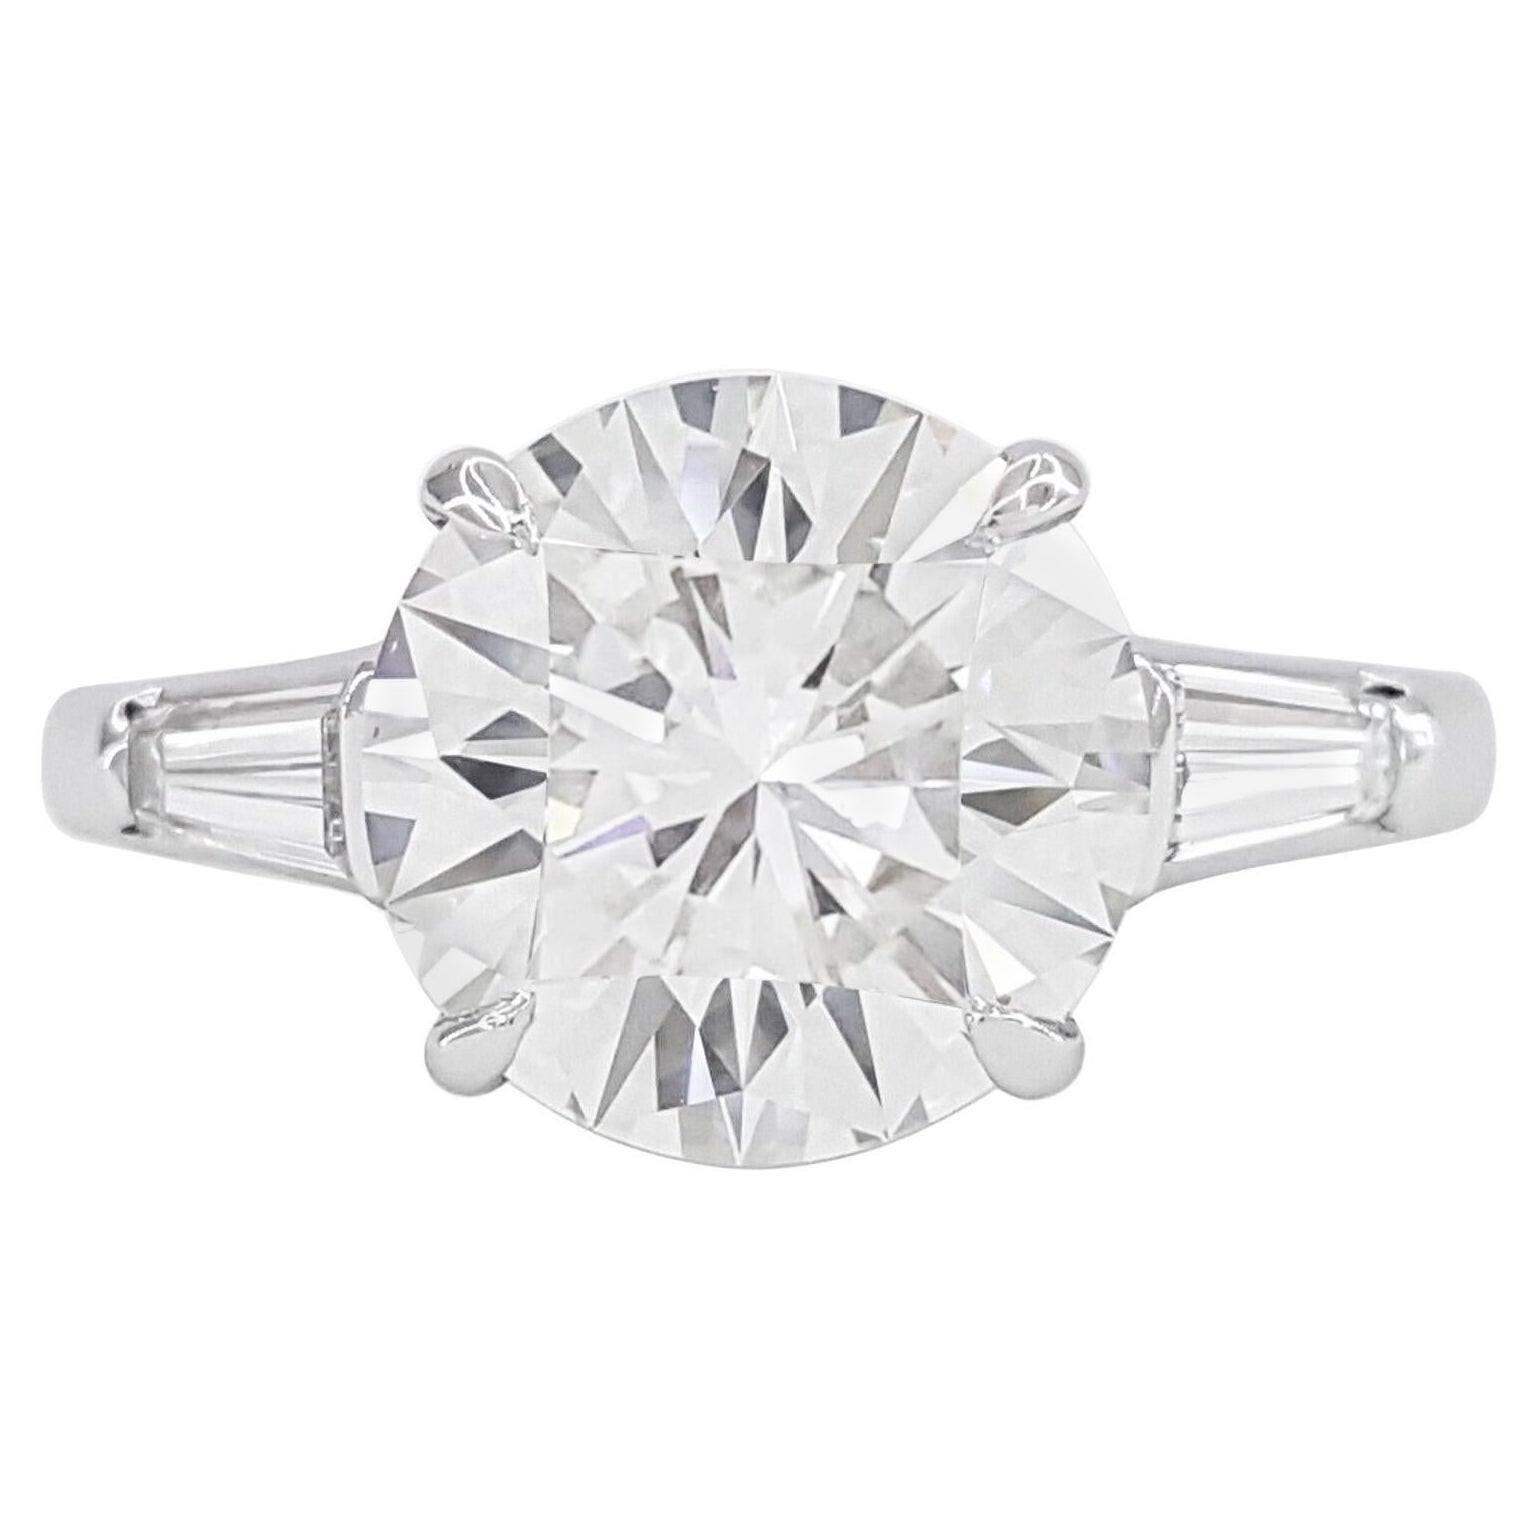 EXCEPTIONAL GIA Certified 2 Carat Round Brilliant Cut Diamond F COLOR FLAWLESS  For Sale